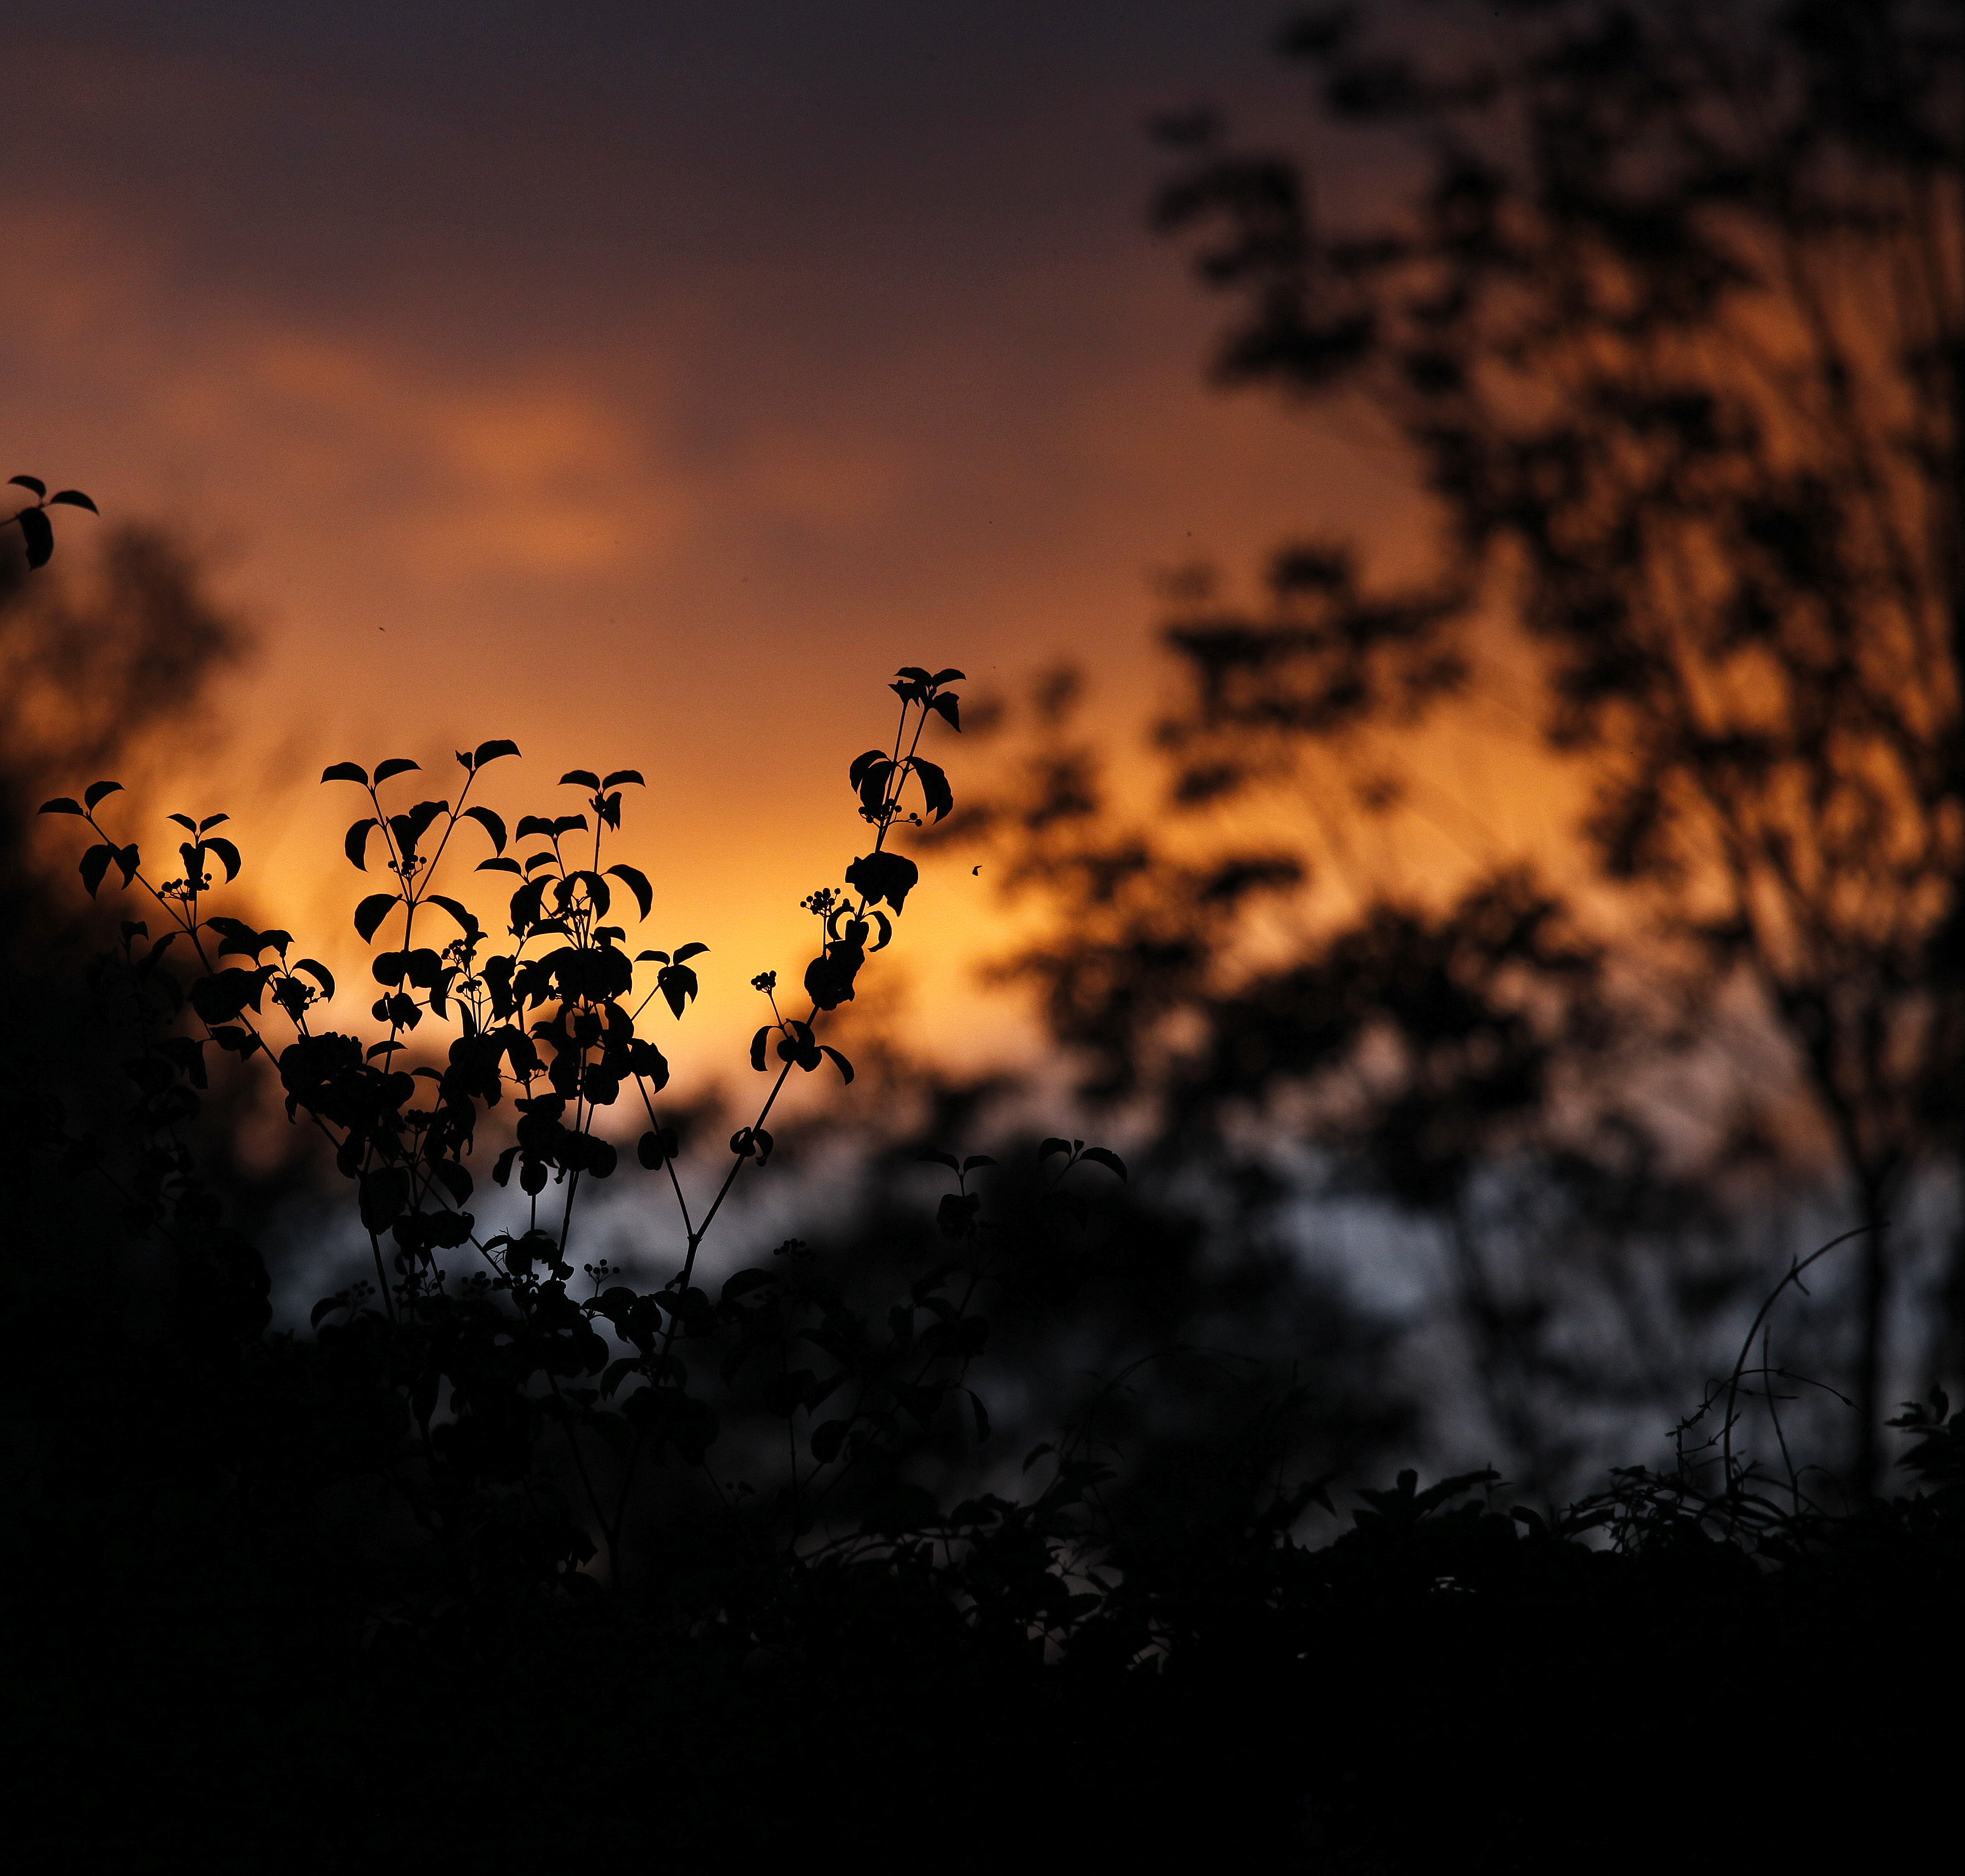 dark, sunset, silhouettes, leaves, outlines, plants UHD